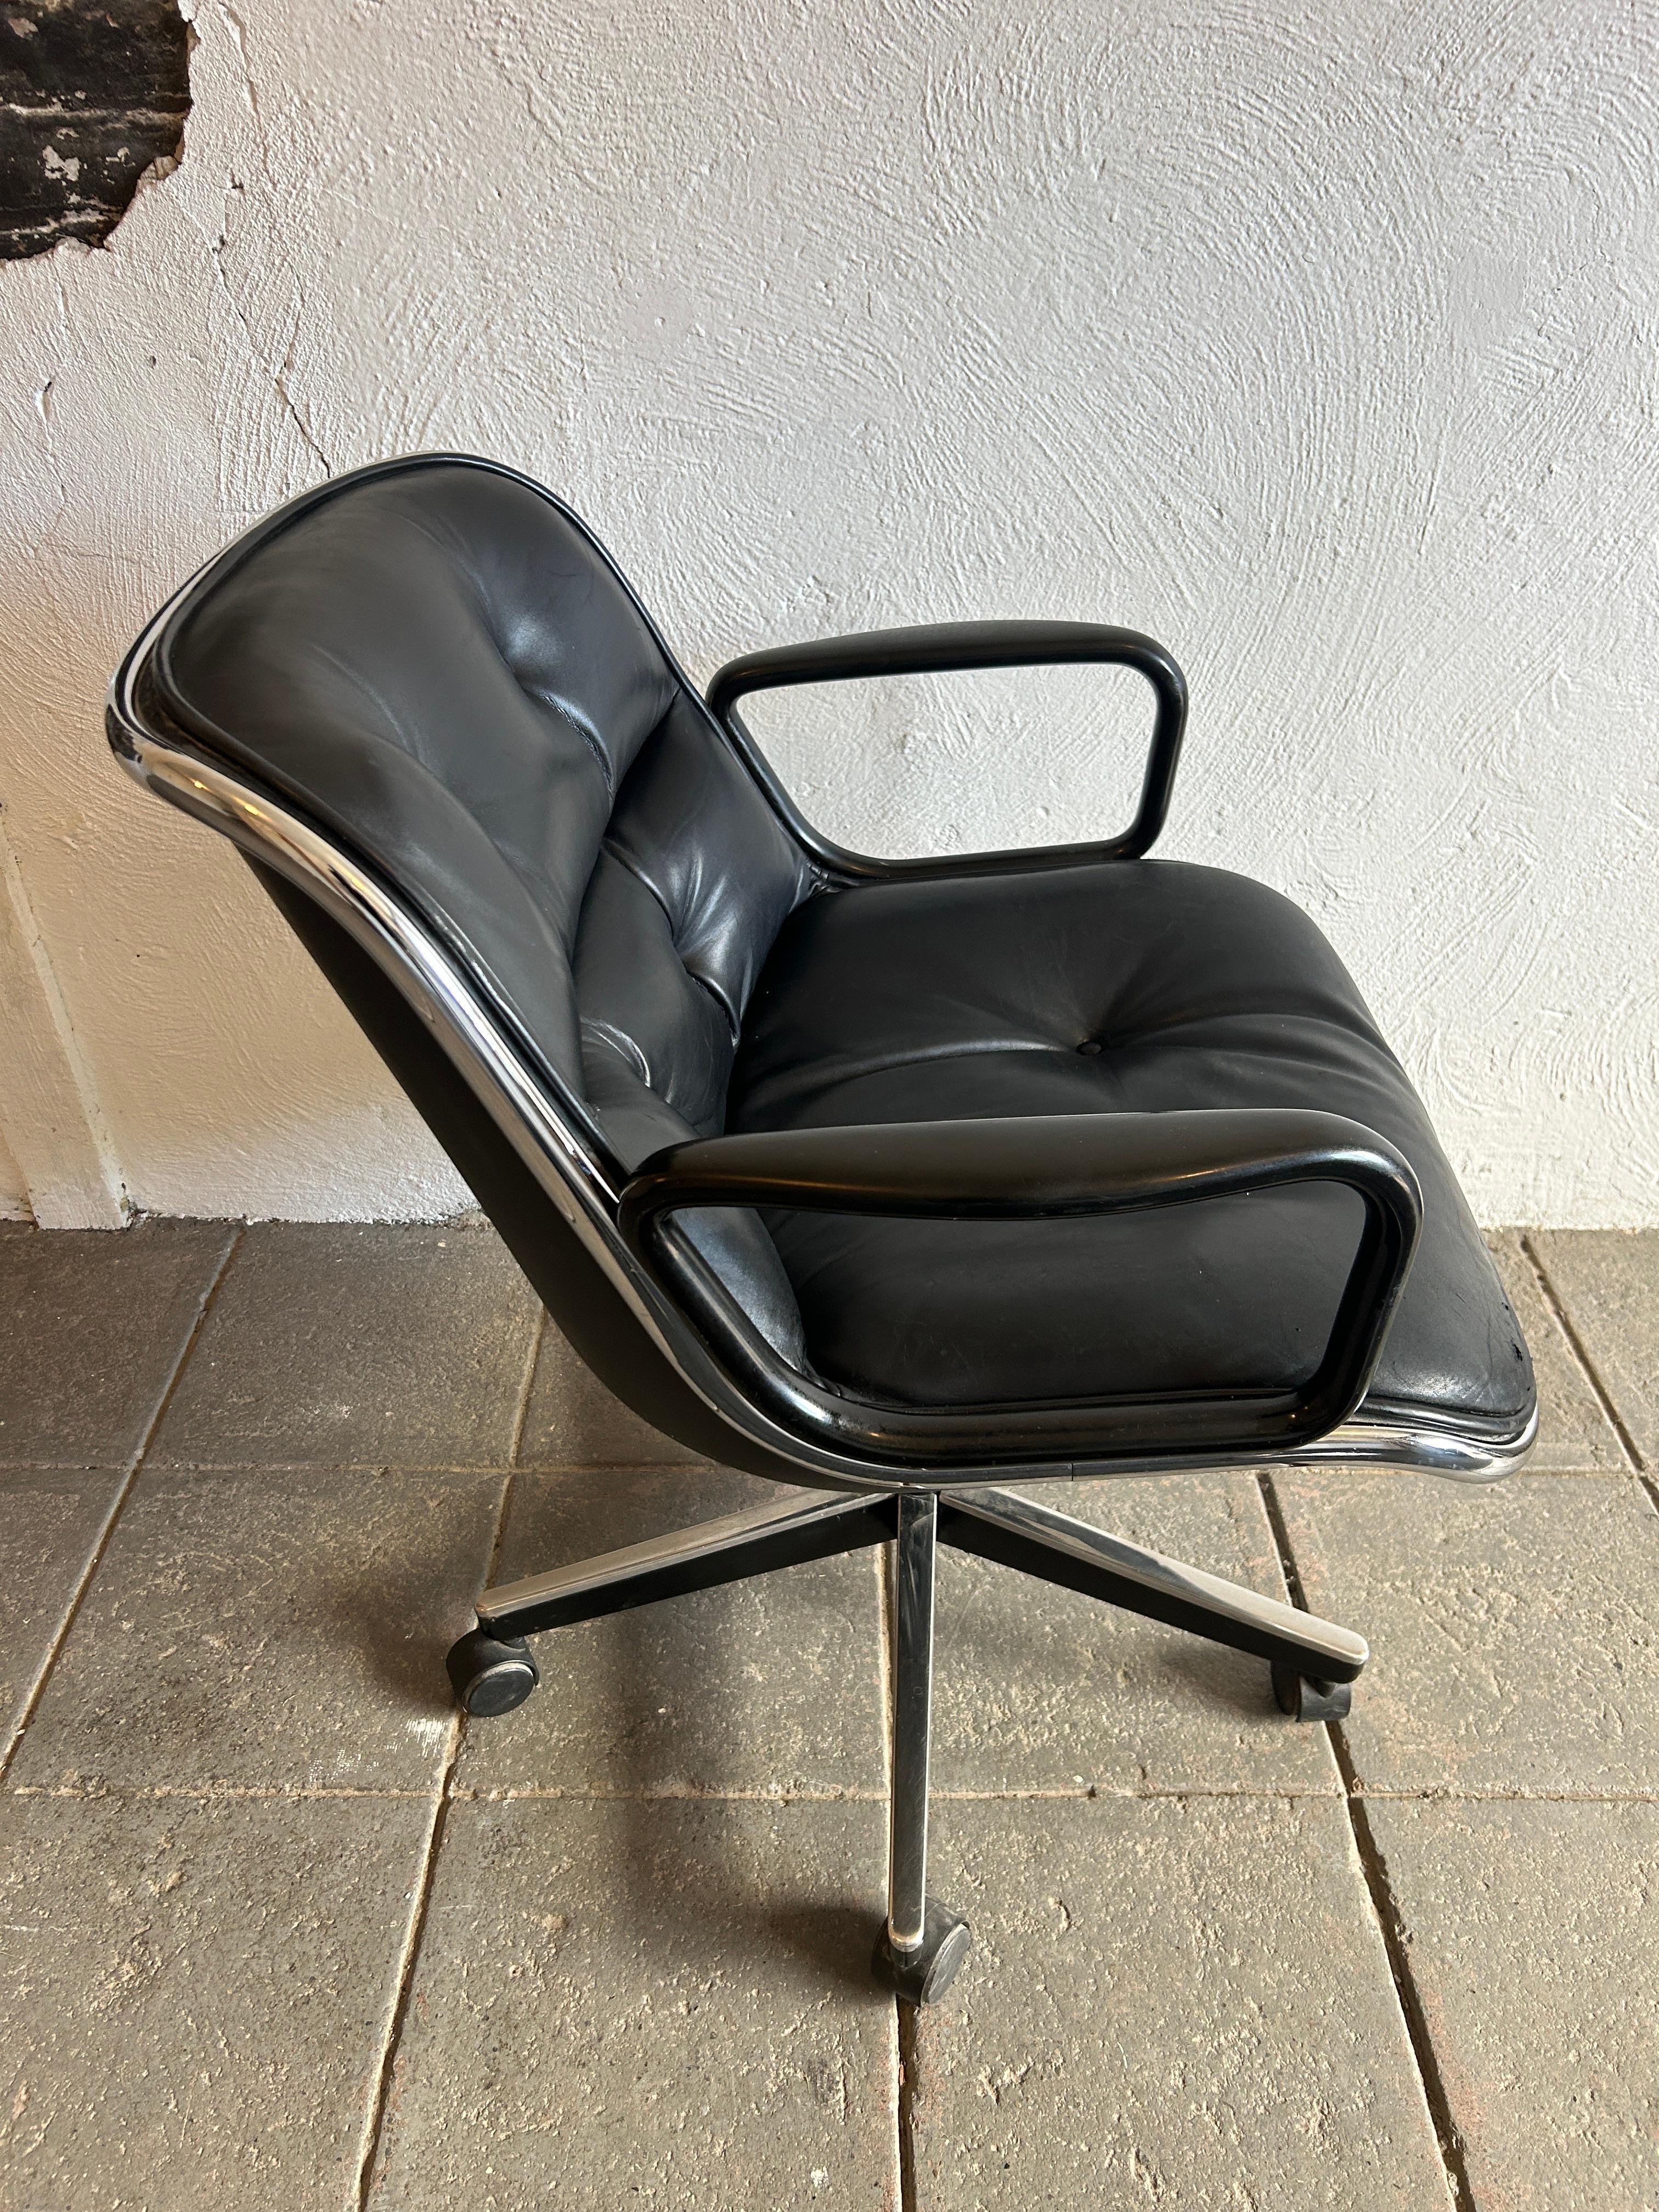 Late 20th Century Mid-Century Modern Charles Pollock Executive Chair for Knoll in Black Leather For Sale